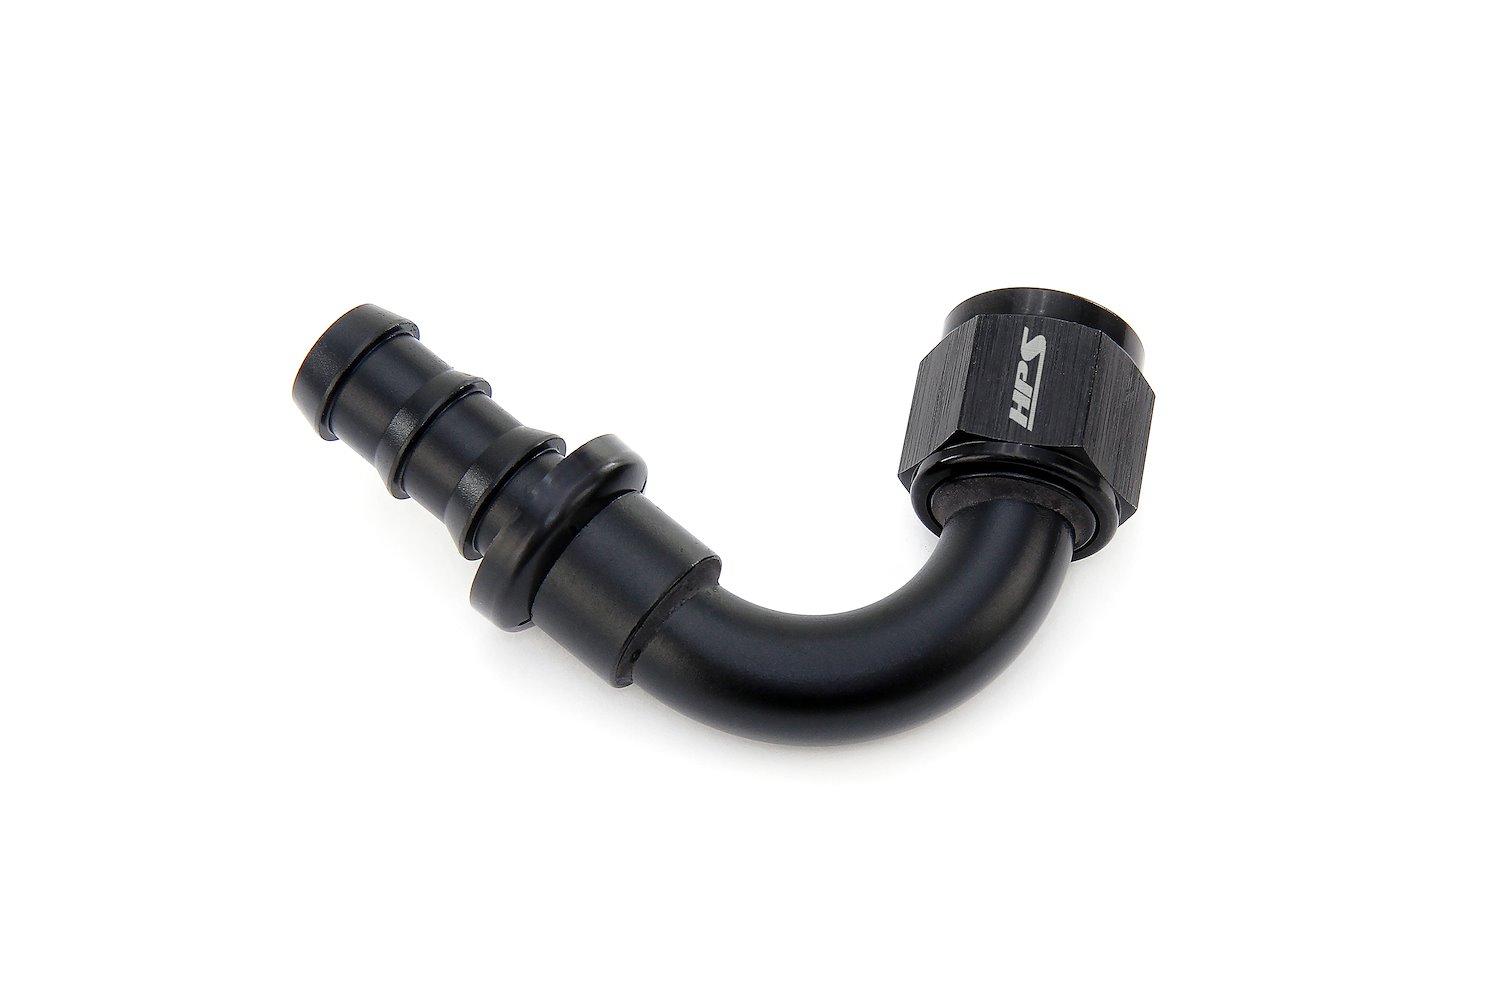 150-1504 150 Series 150-Deg Hose End, Tool-Free Assembly Hose Ends, For Push-On Style Hoses, Easy To Use